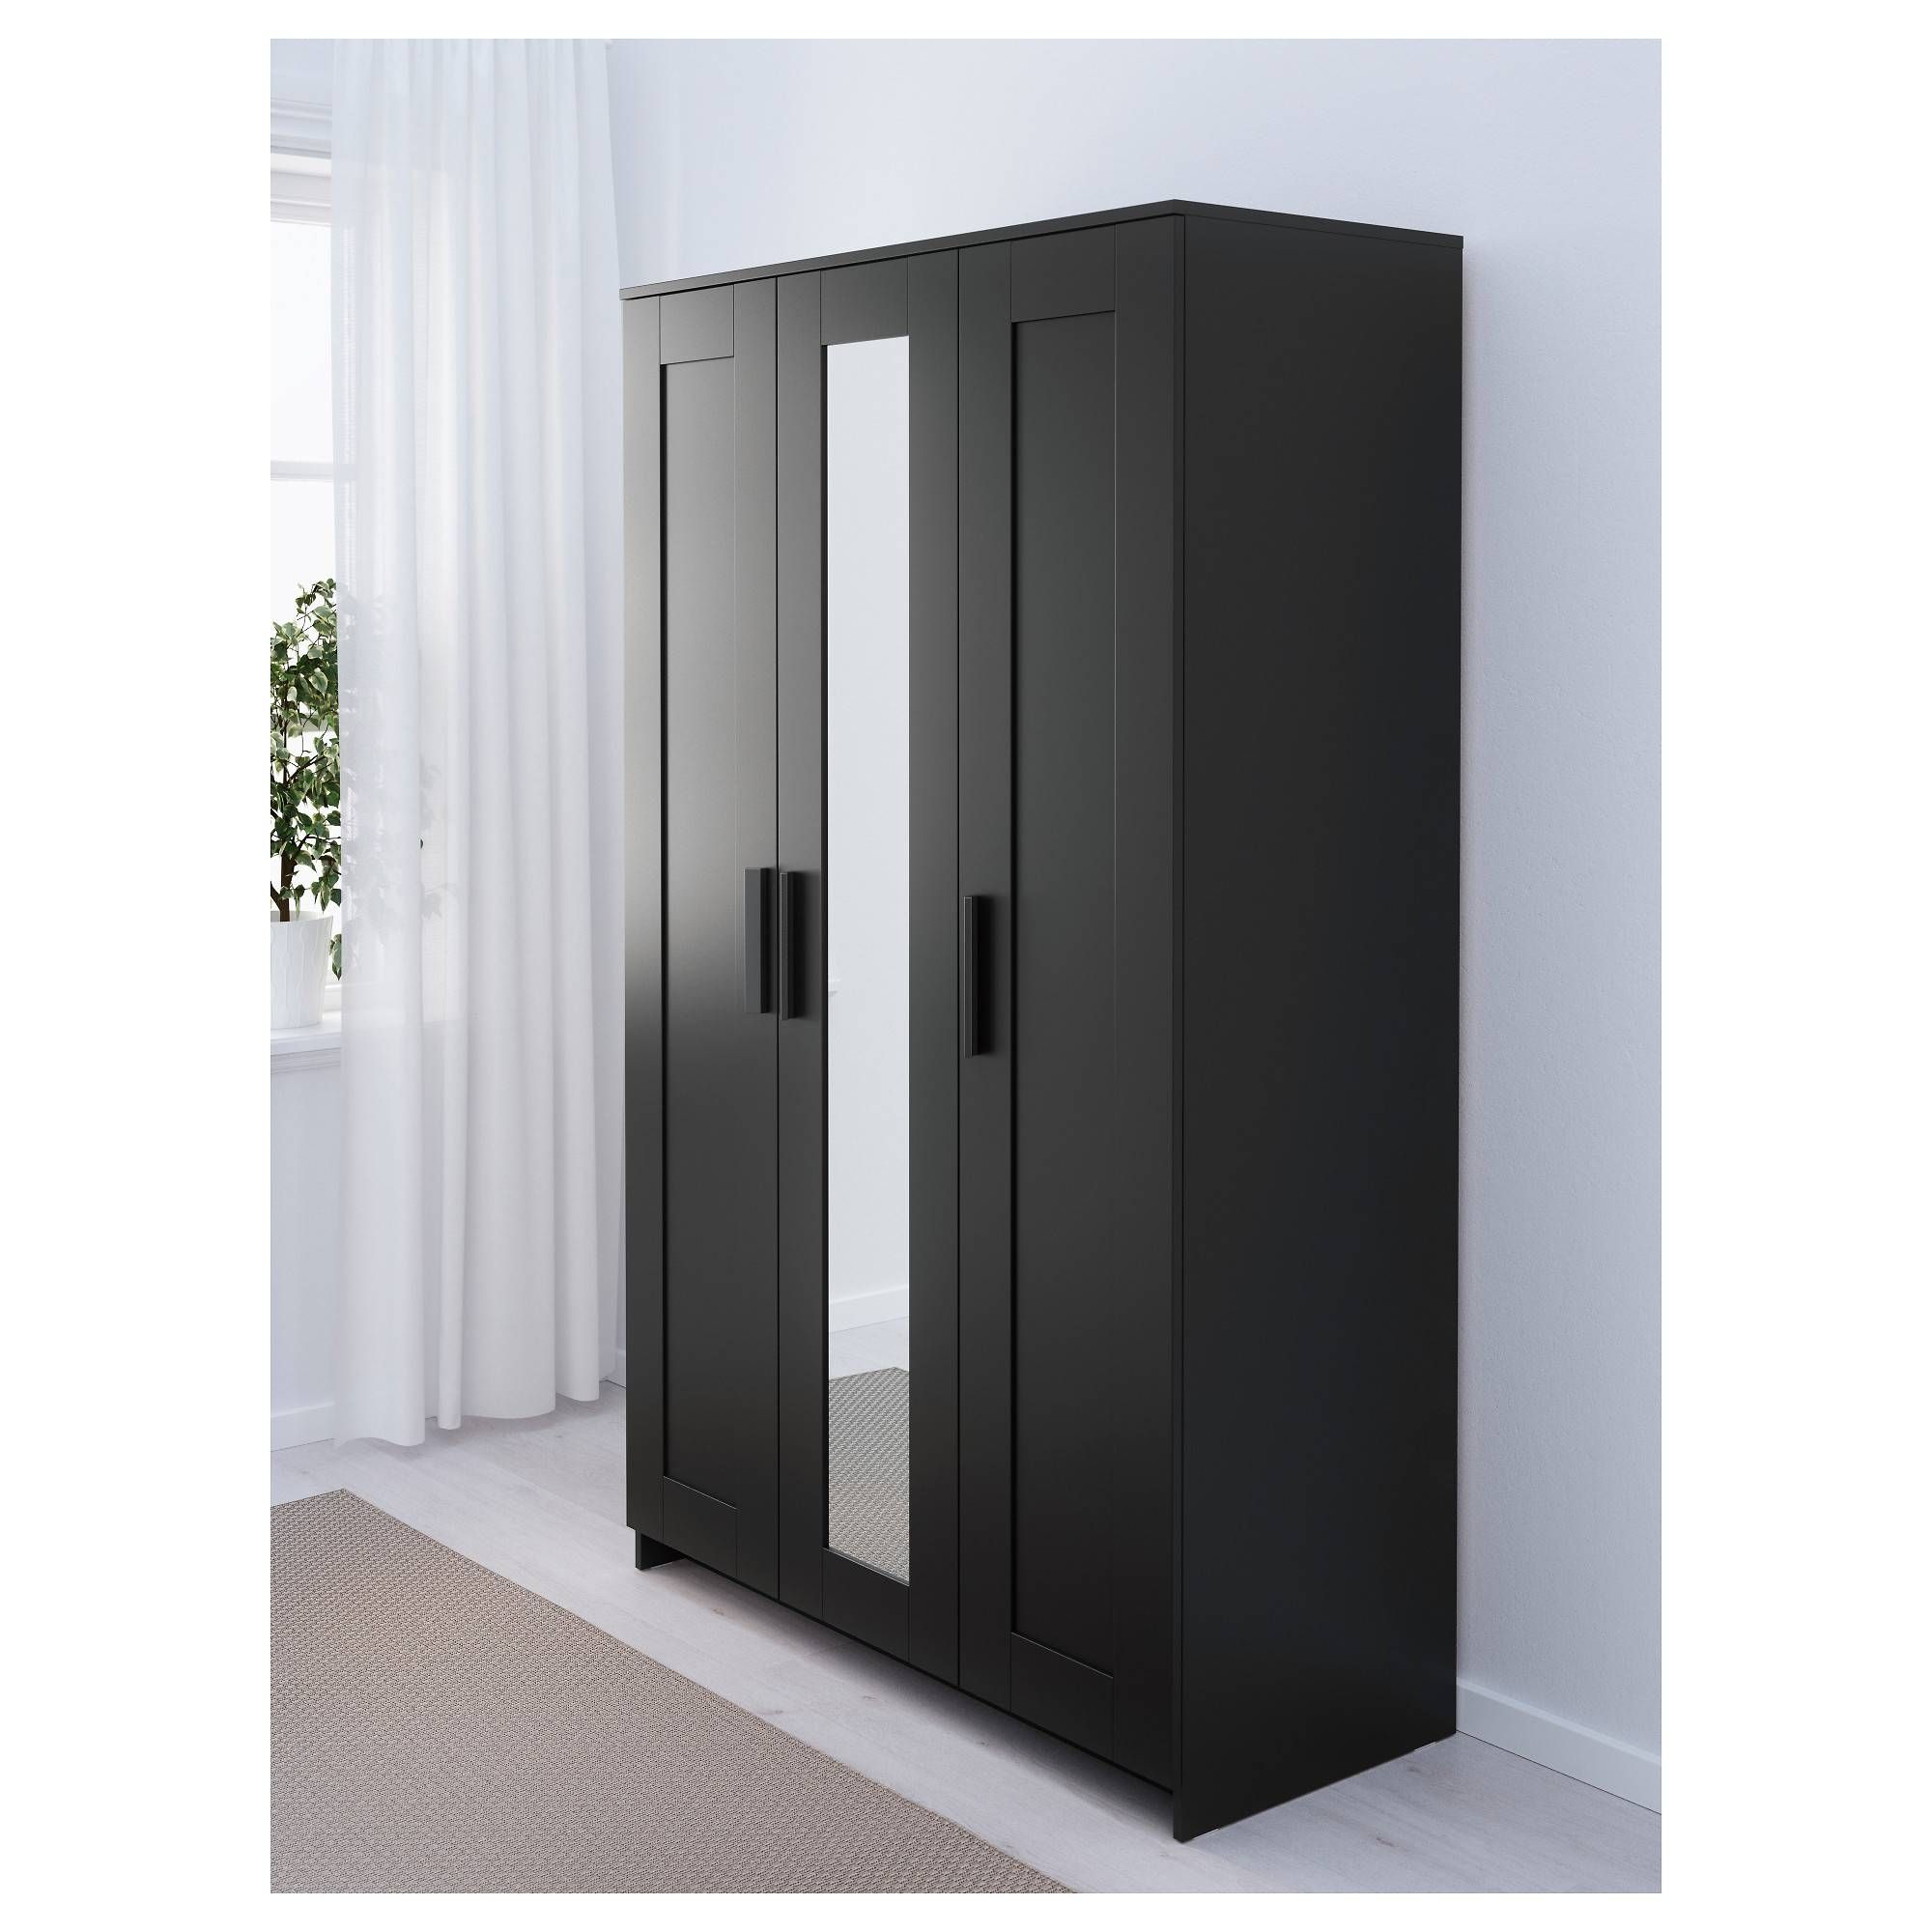 Brimnes Wardrobe With 3 Doors – White – Ikea Intended For One Door Mirrored Wardrobes (View 13 of 15)